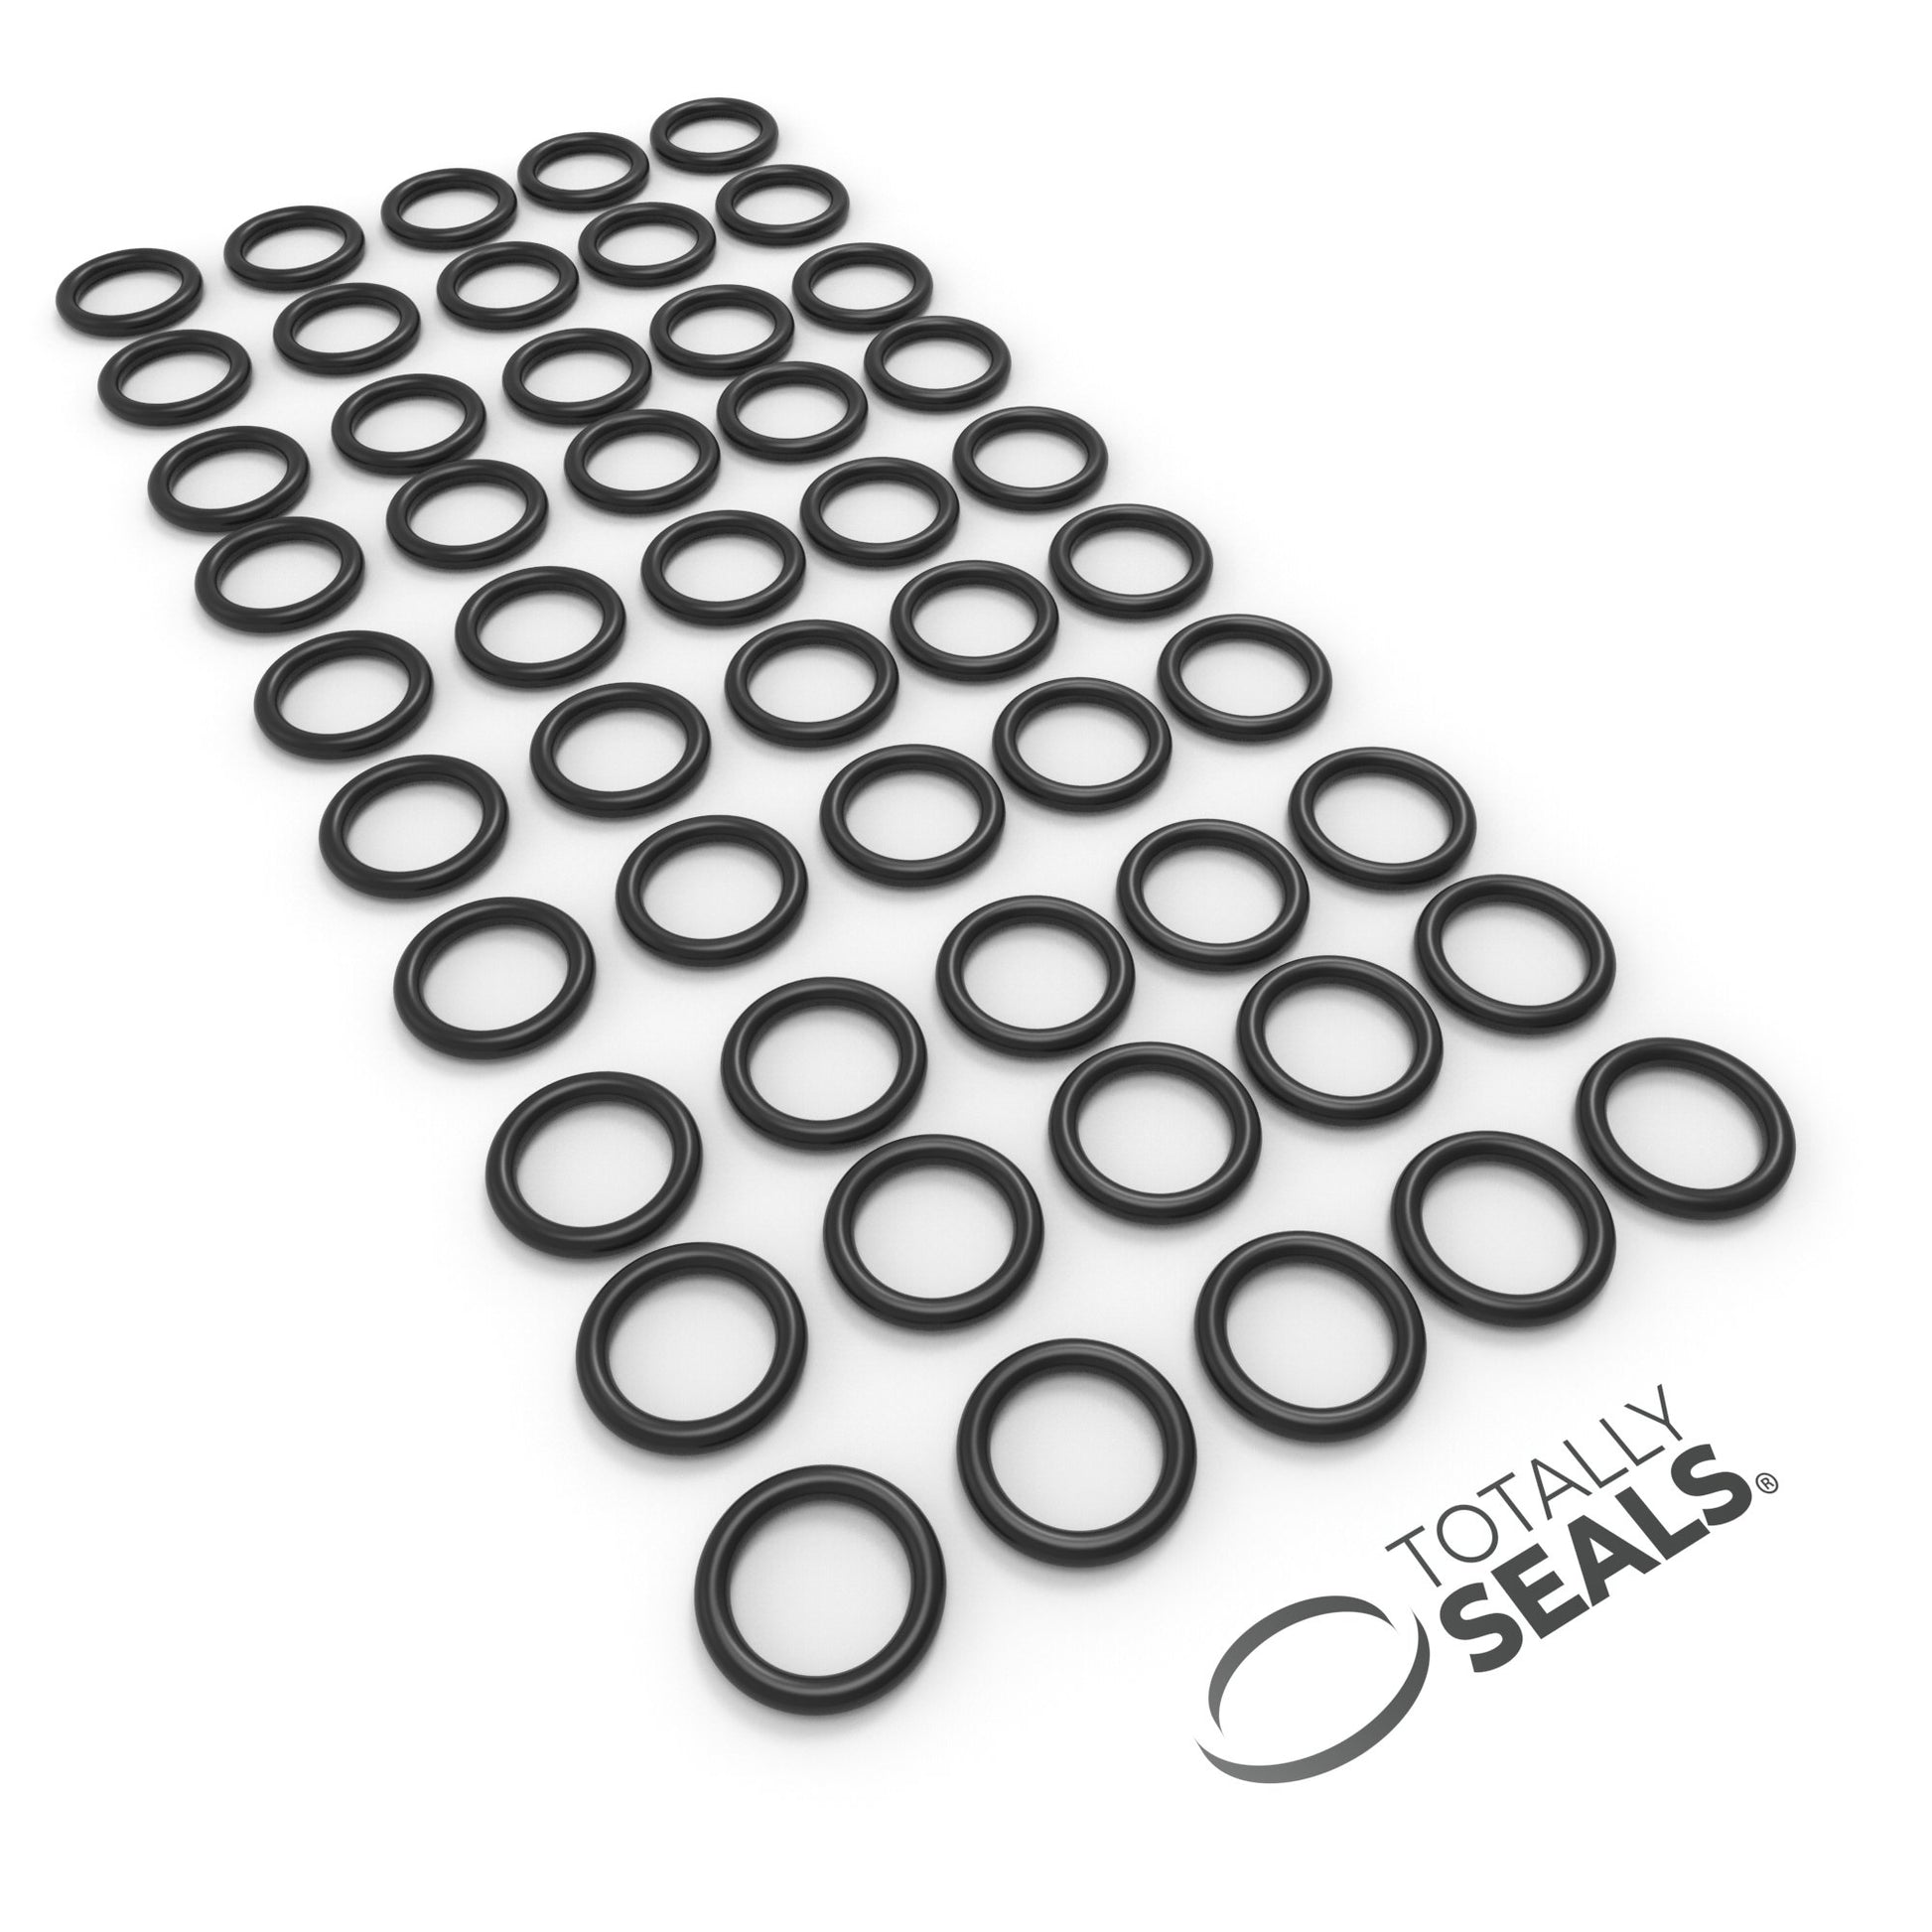 18mm x 3.5mm (25mm OD) Nitrile O-Rings - Totally Seals®